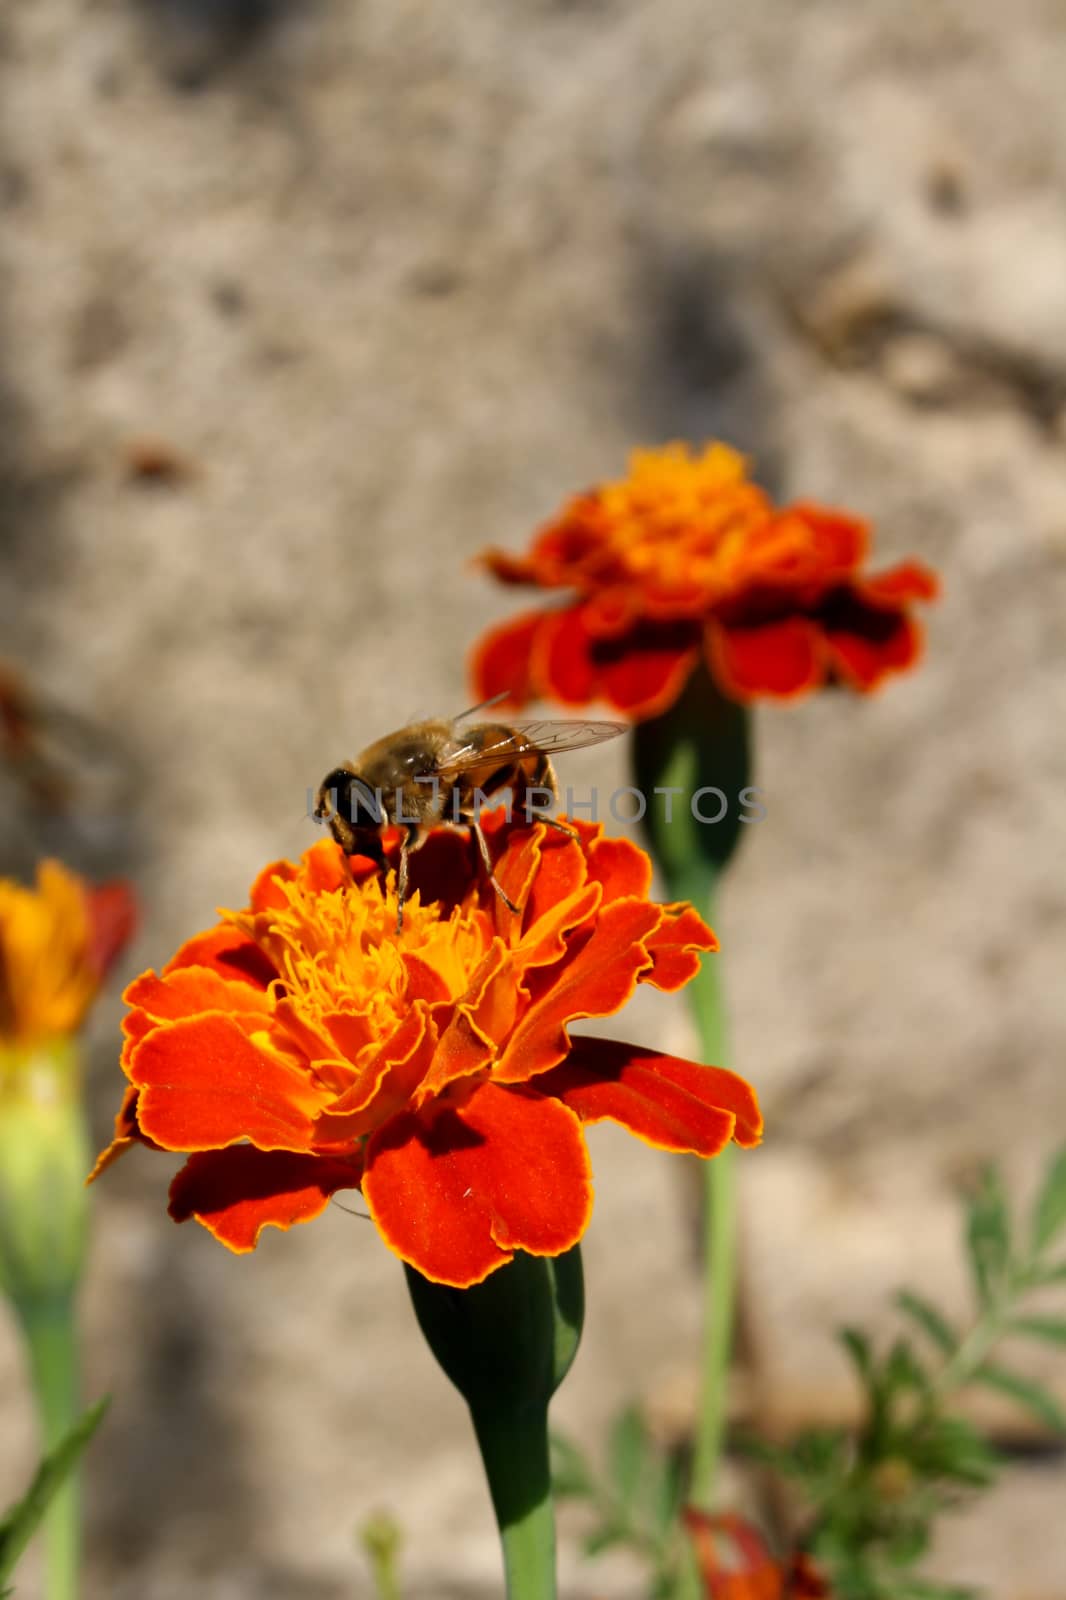 Bee collecting pollen from a flower